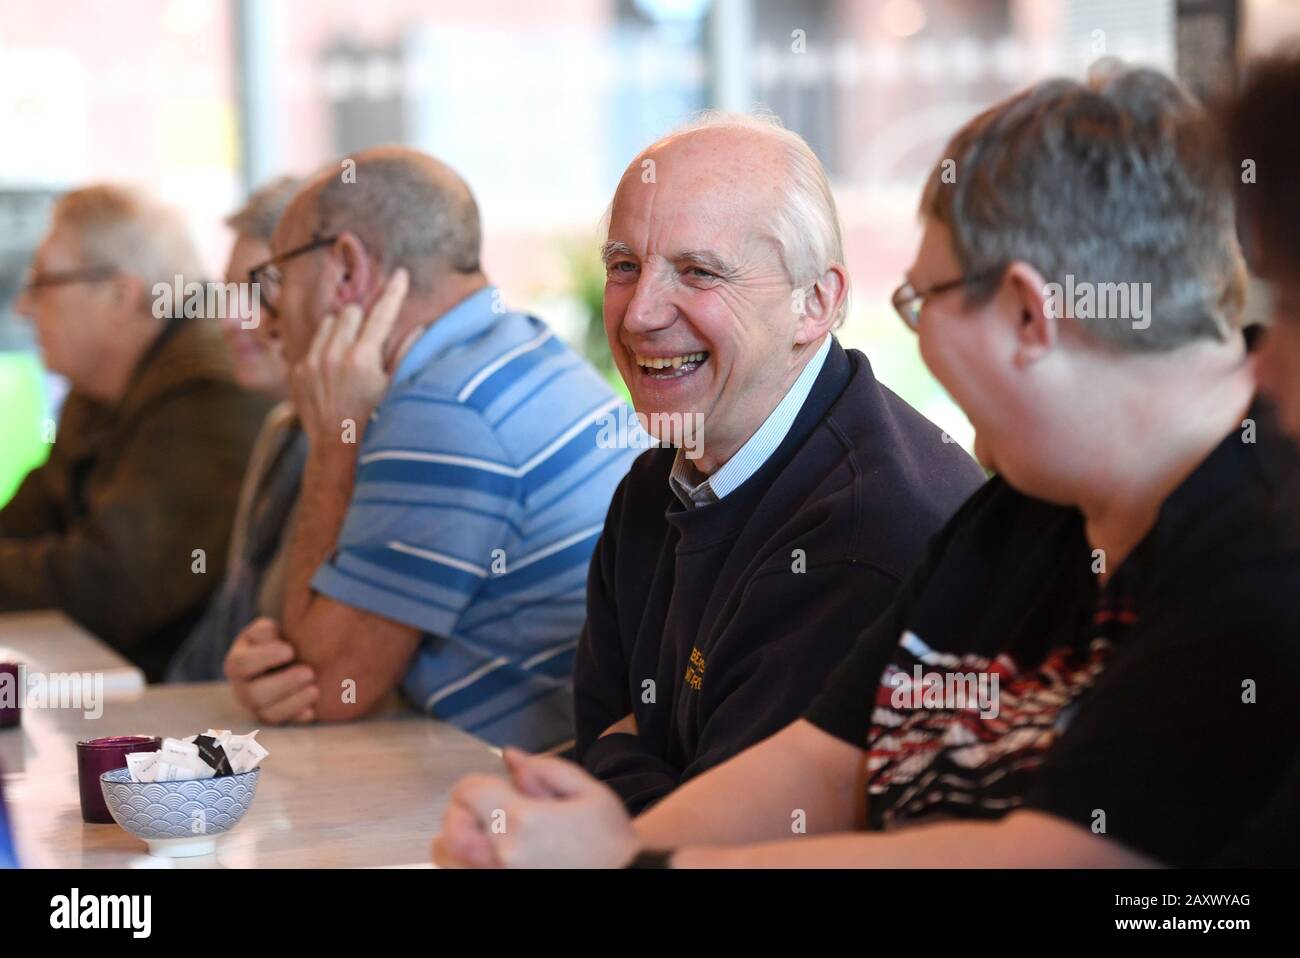 Robert Salt attends a plant-based Valentines lunch hosted by The Meatless Farm to bring together elderly members of the community, at Age UK's Arch Cafe in Leeds. PA Photo. Picture date: Thursday February 13, 2020. Photo credit should read: Anna Gowthorpe/PA Wire Stock Photo